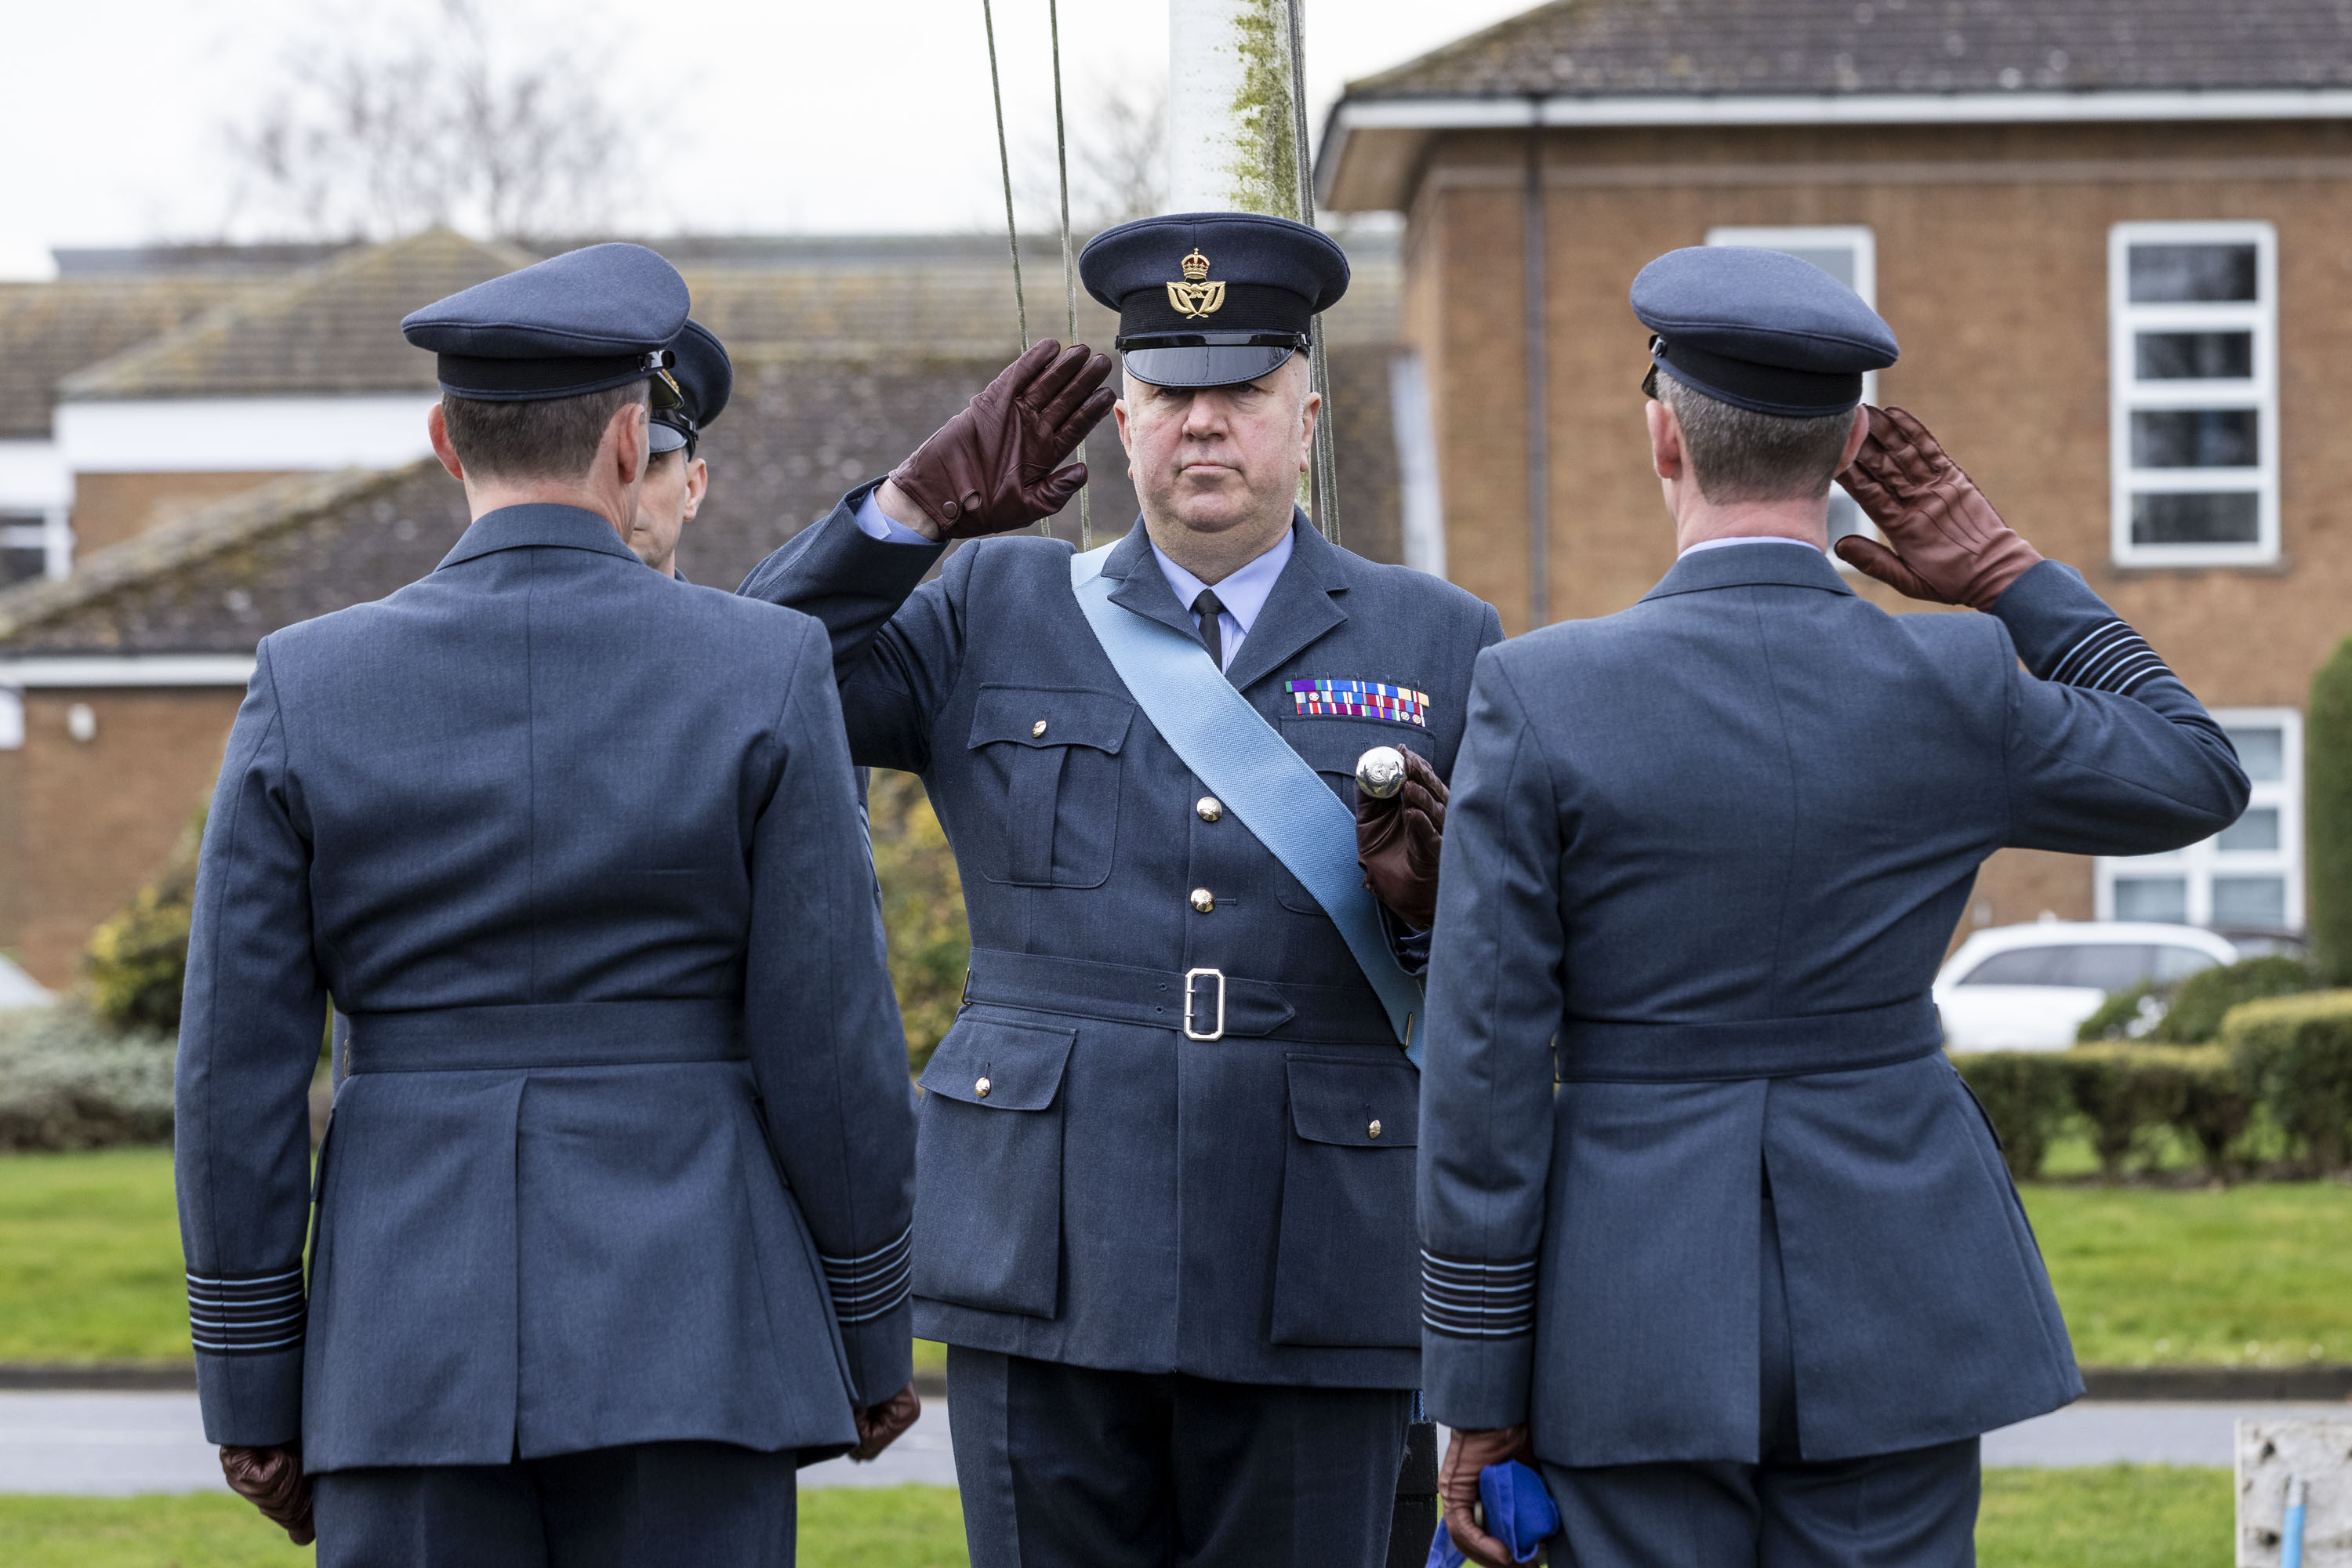 The two Station Commanders are saluted by the Station Warrant Officer. 